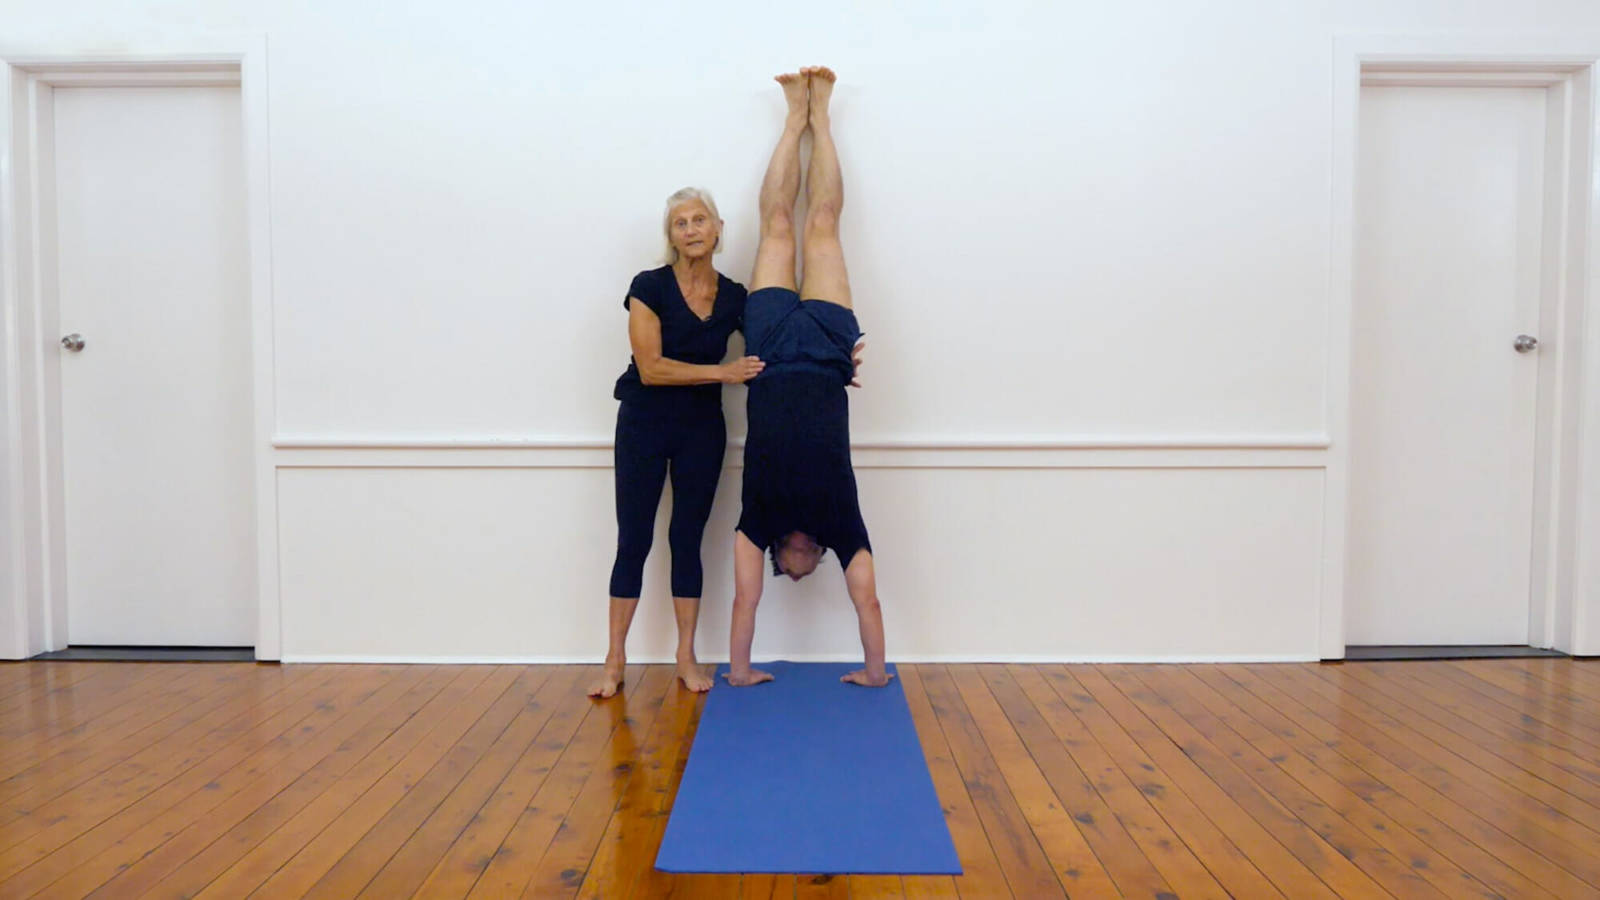 A Step-by-Step Guide to Full Arm Balance